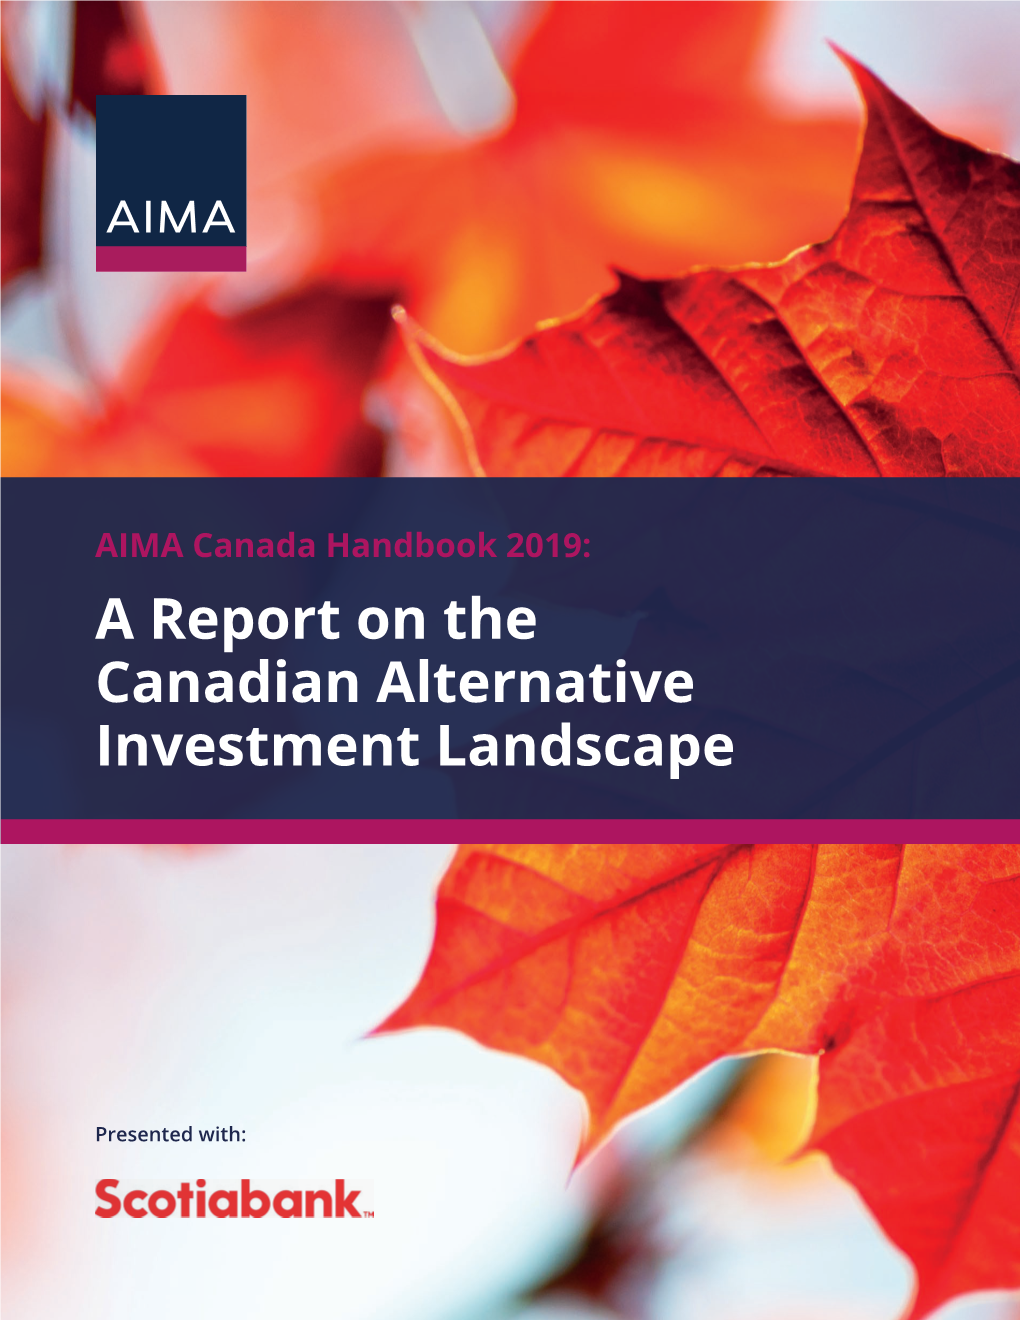 AIMA Canada Handbook 2019: a Report on the Canadian Alternative Investment Landscape